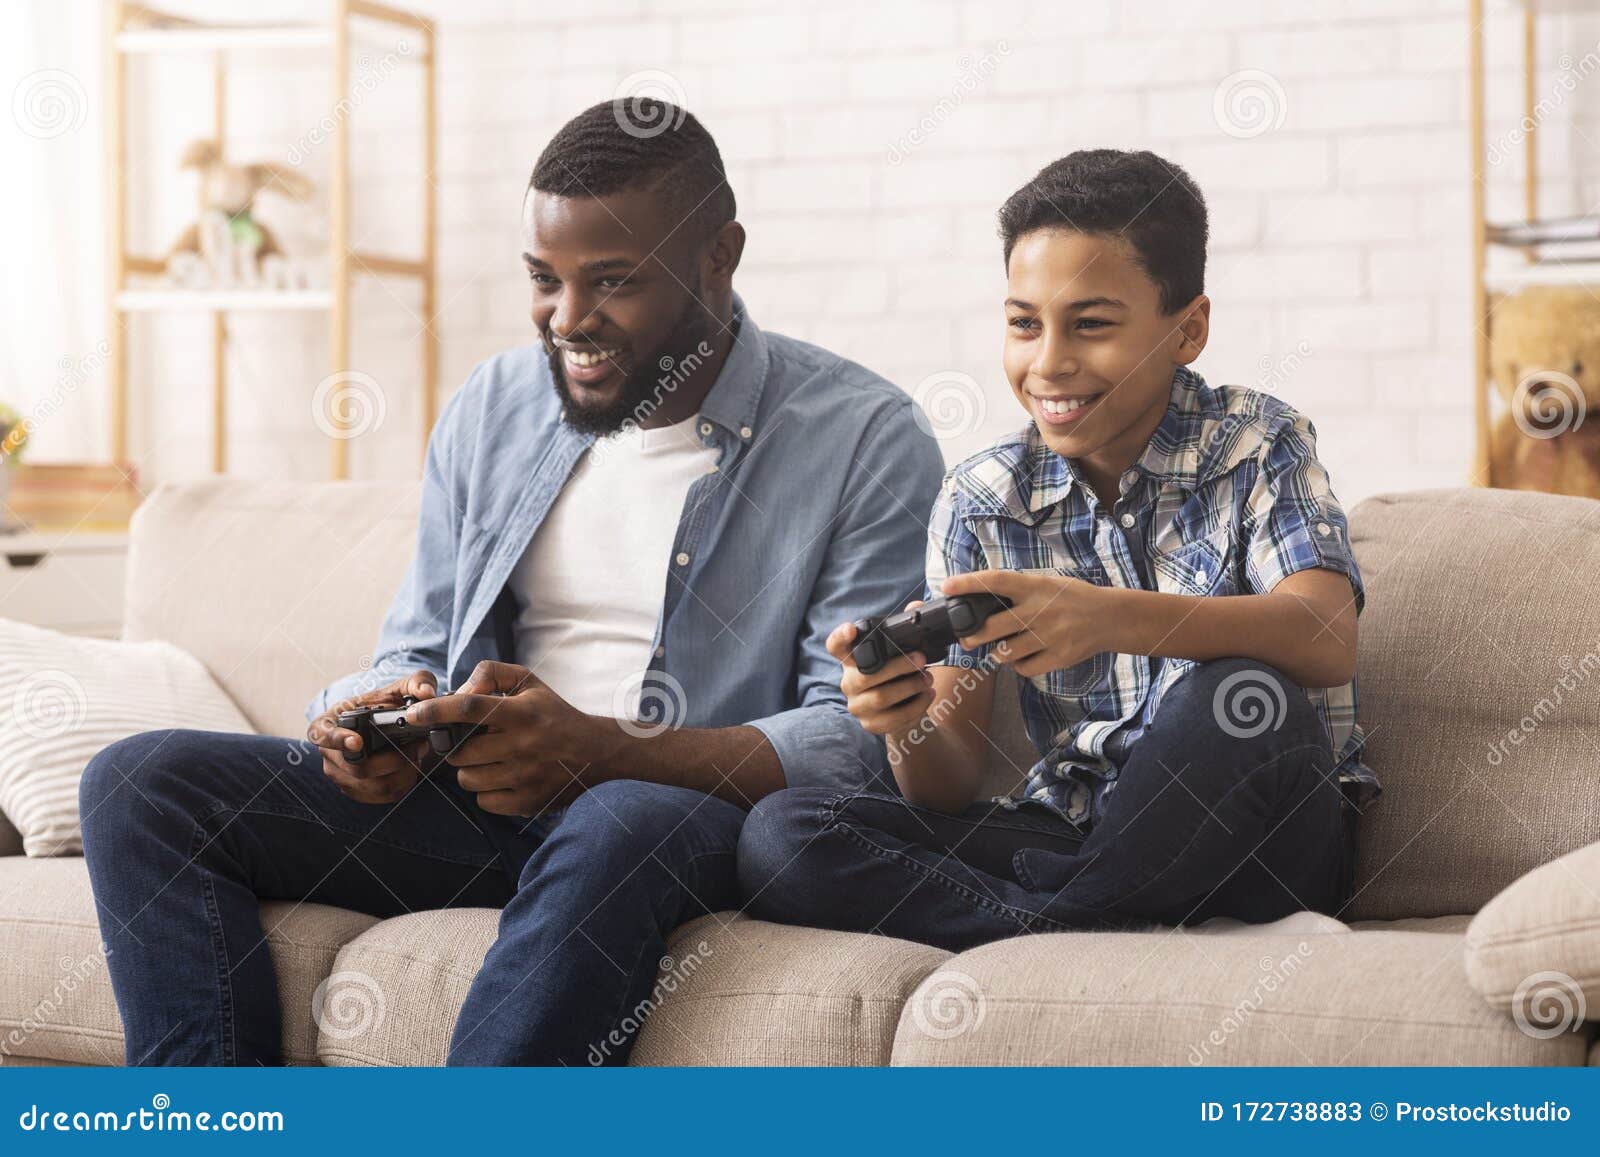 3,919 Black Kids Playing Video Games Royalty-Free Images, Stock